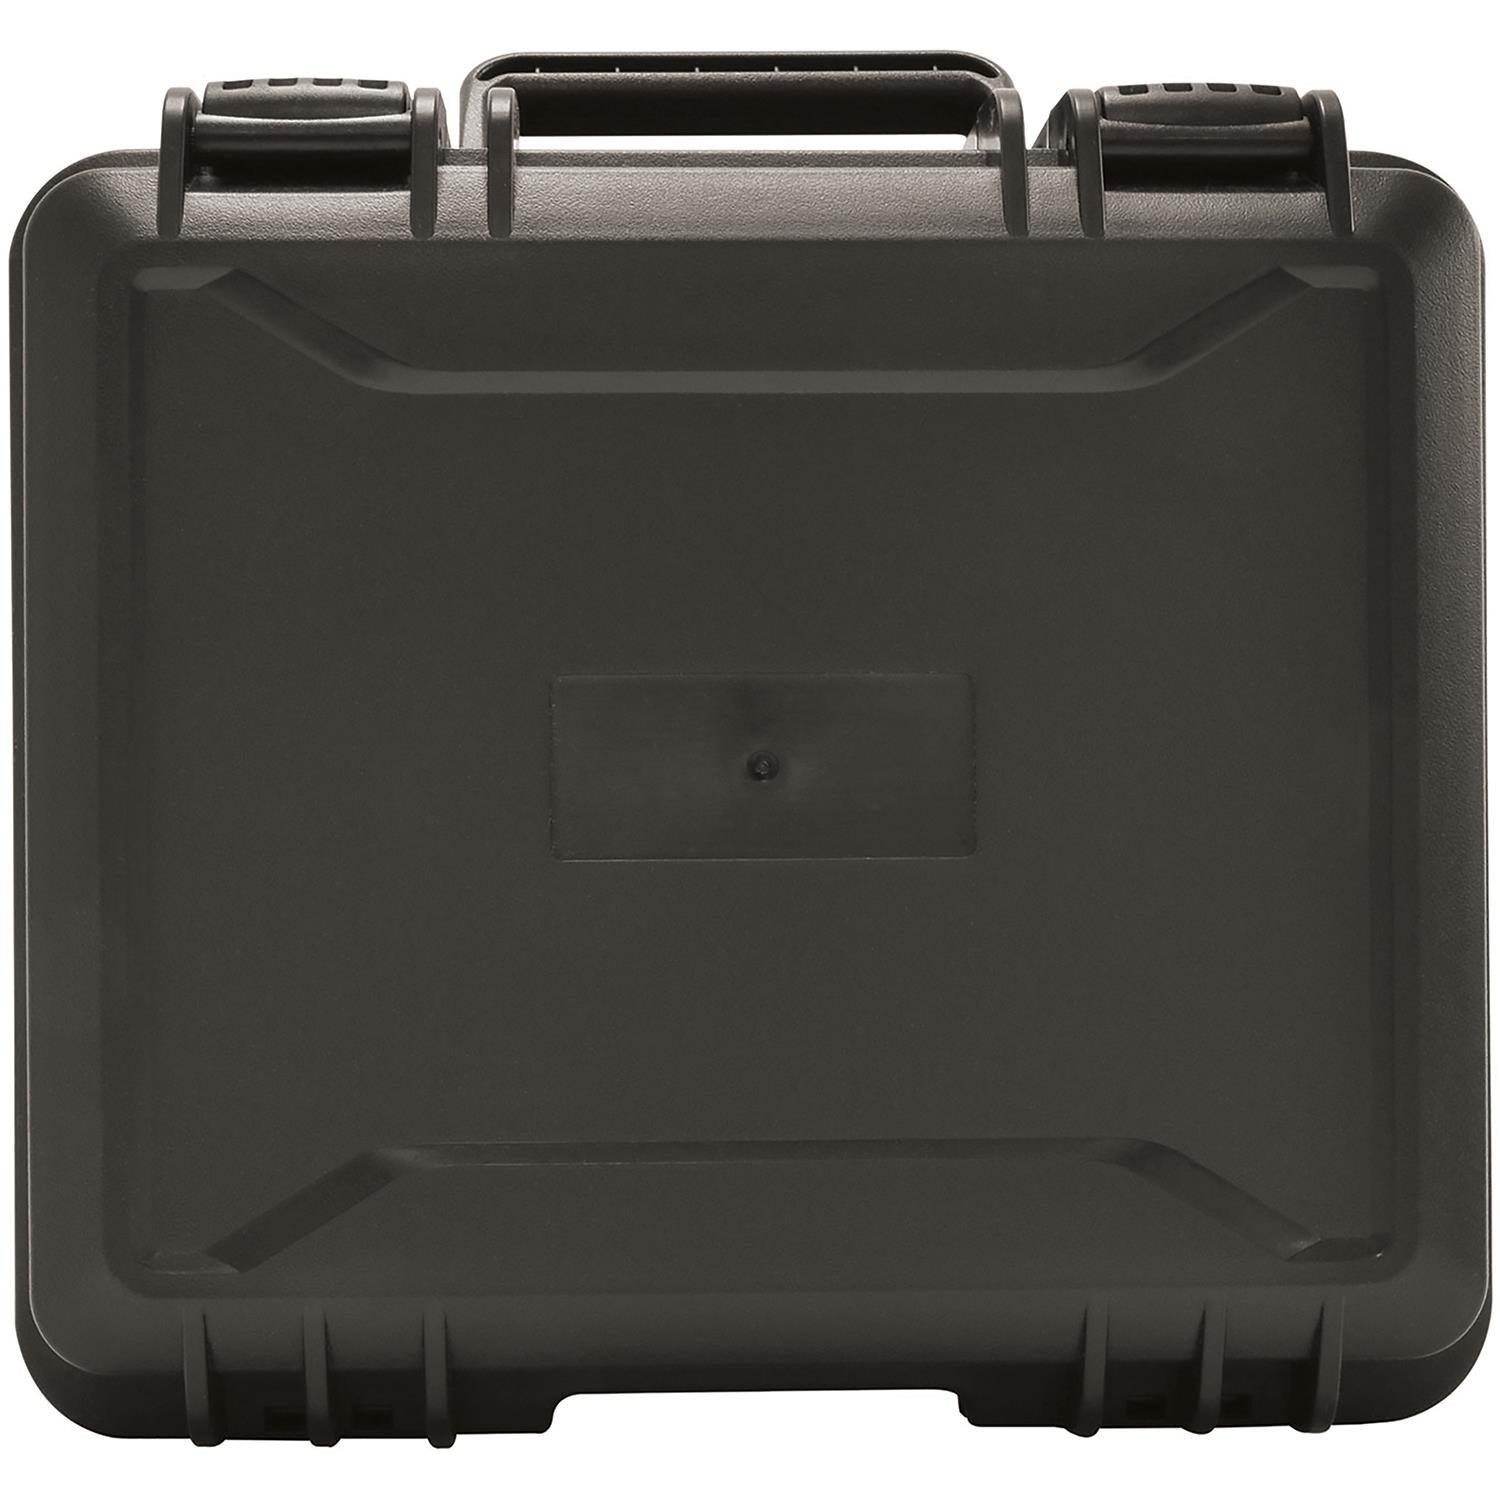 Citronic Heavy Duty Compact ABS Transit Case - DY Pro Audio